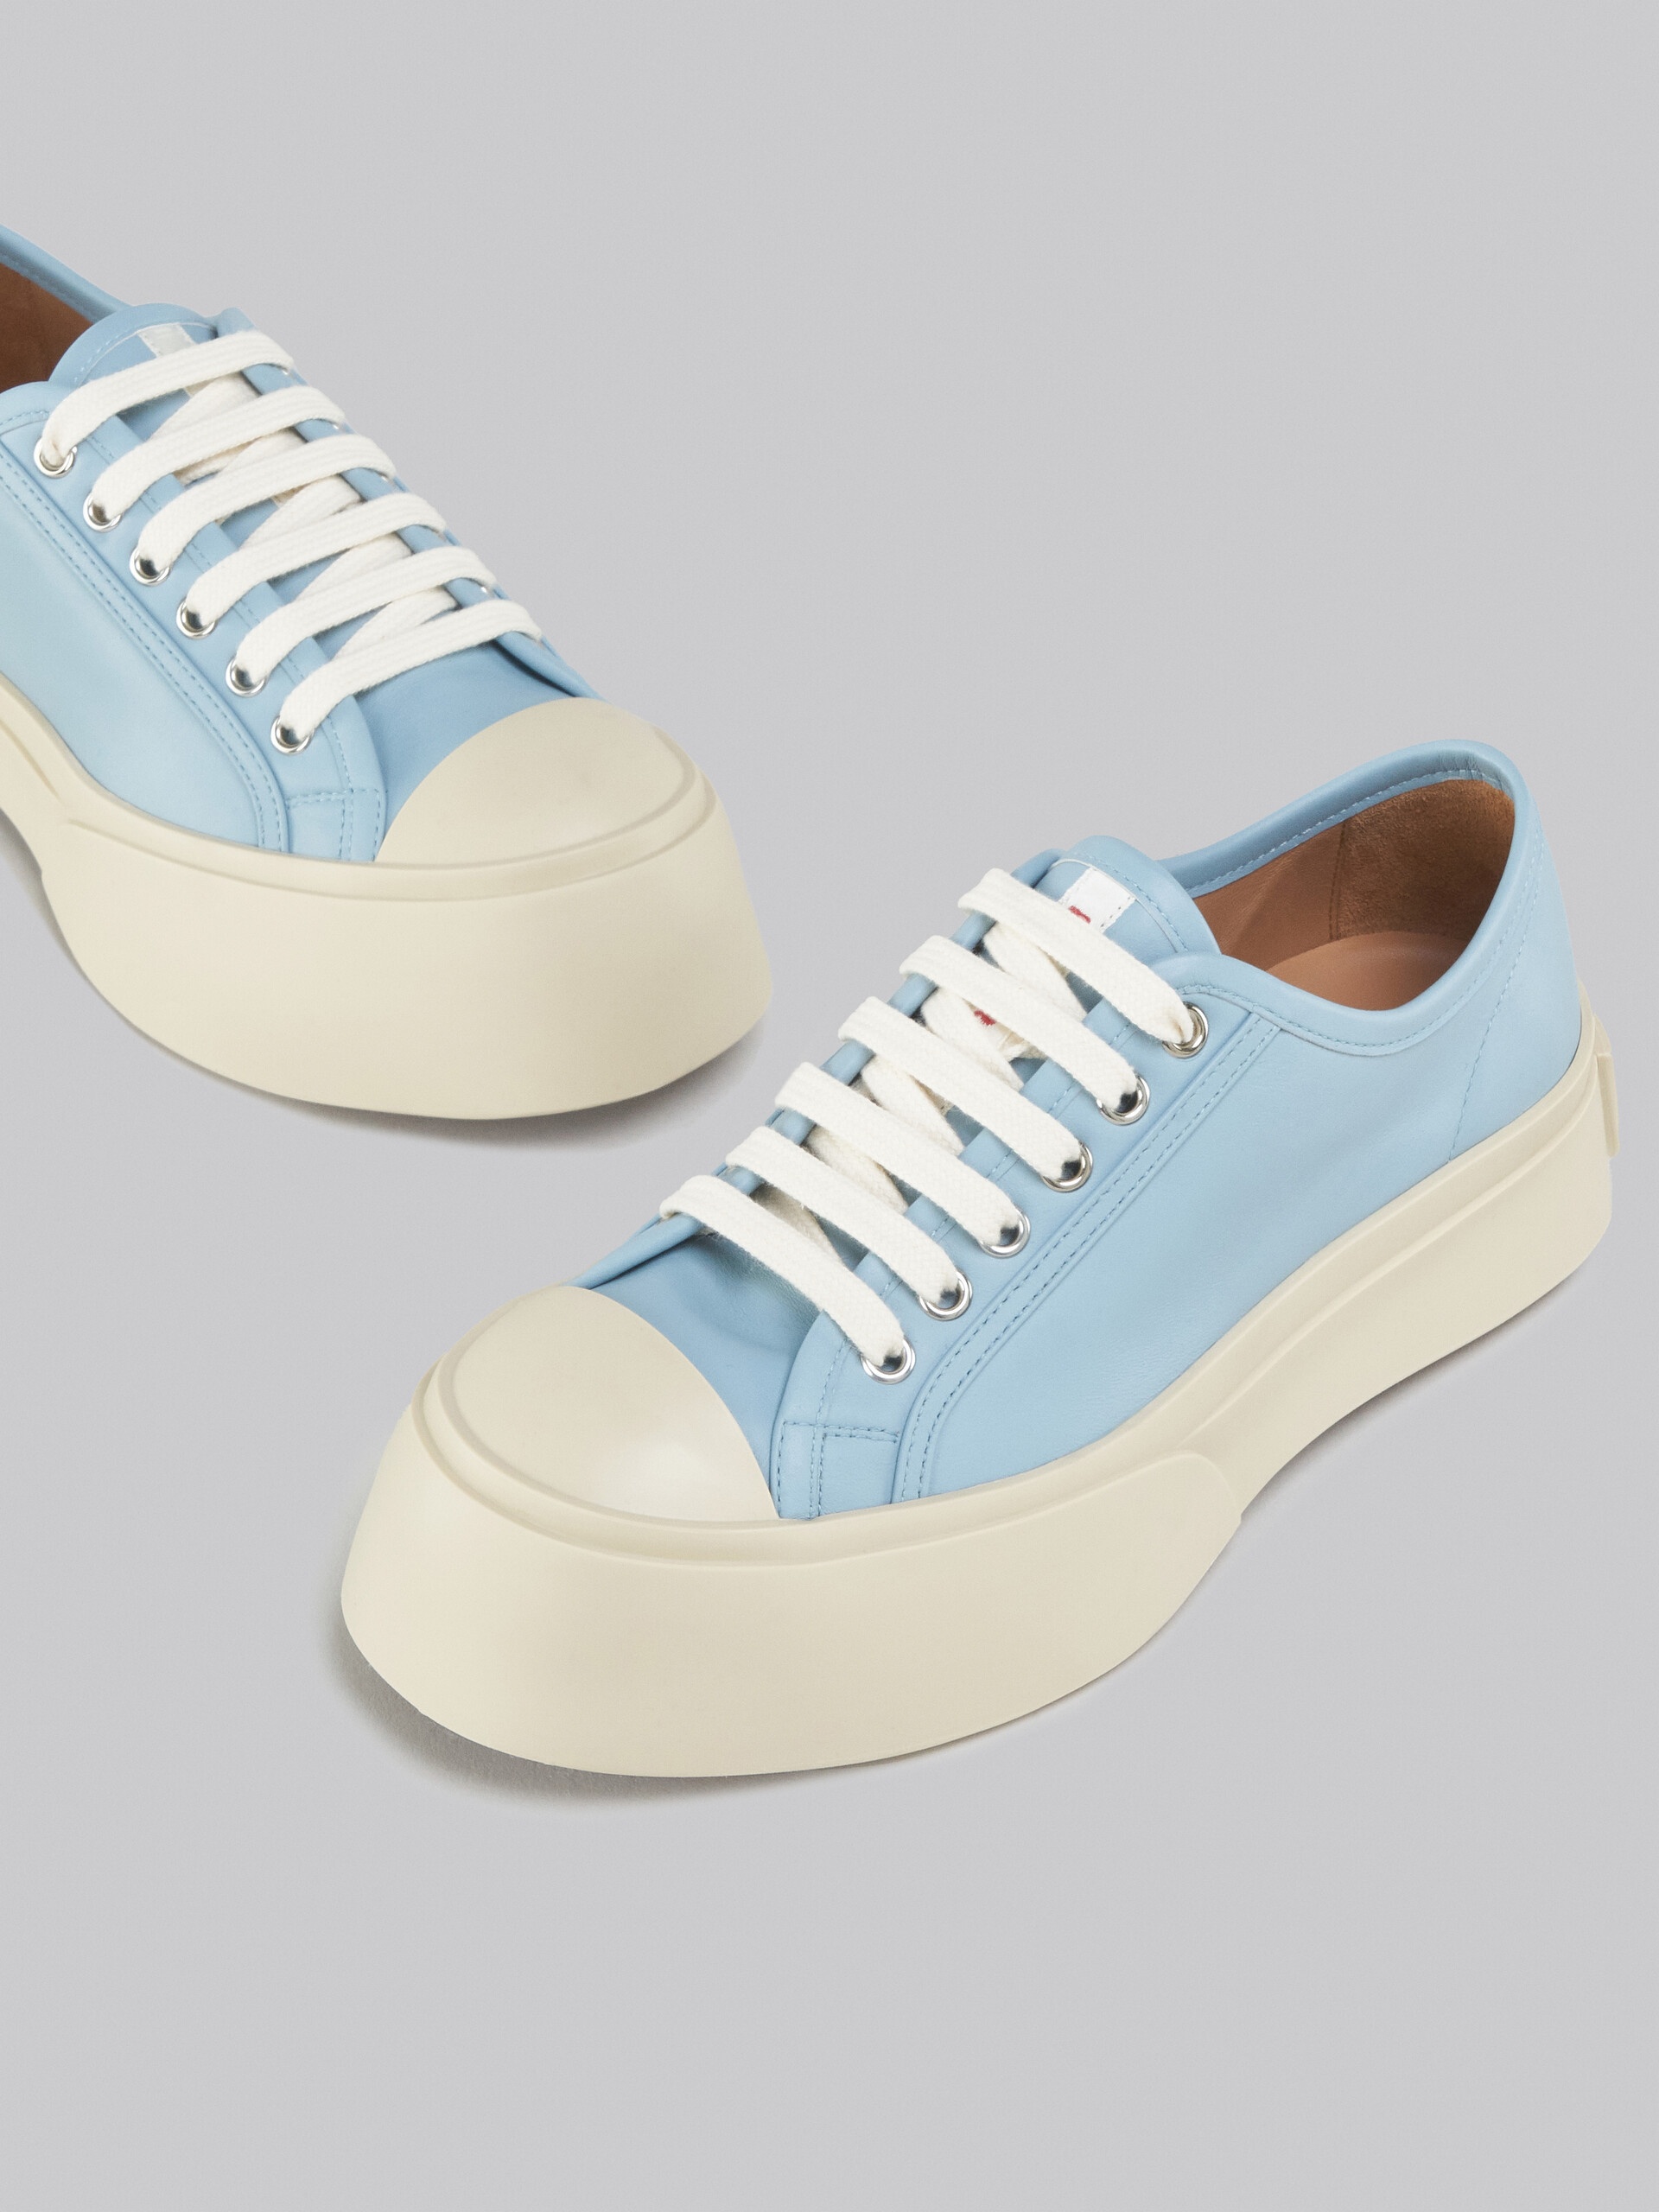 LIGHT BLUE NAPPA LEATHER PABLO LACE-UP SNEAKER - 5